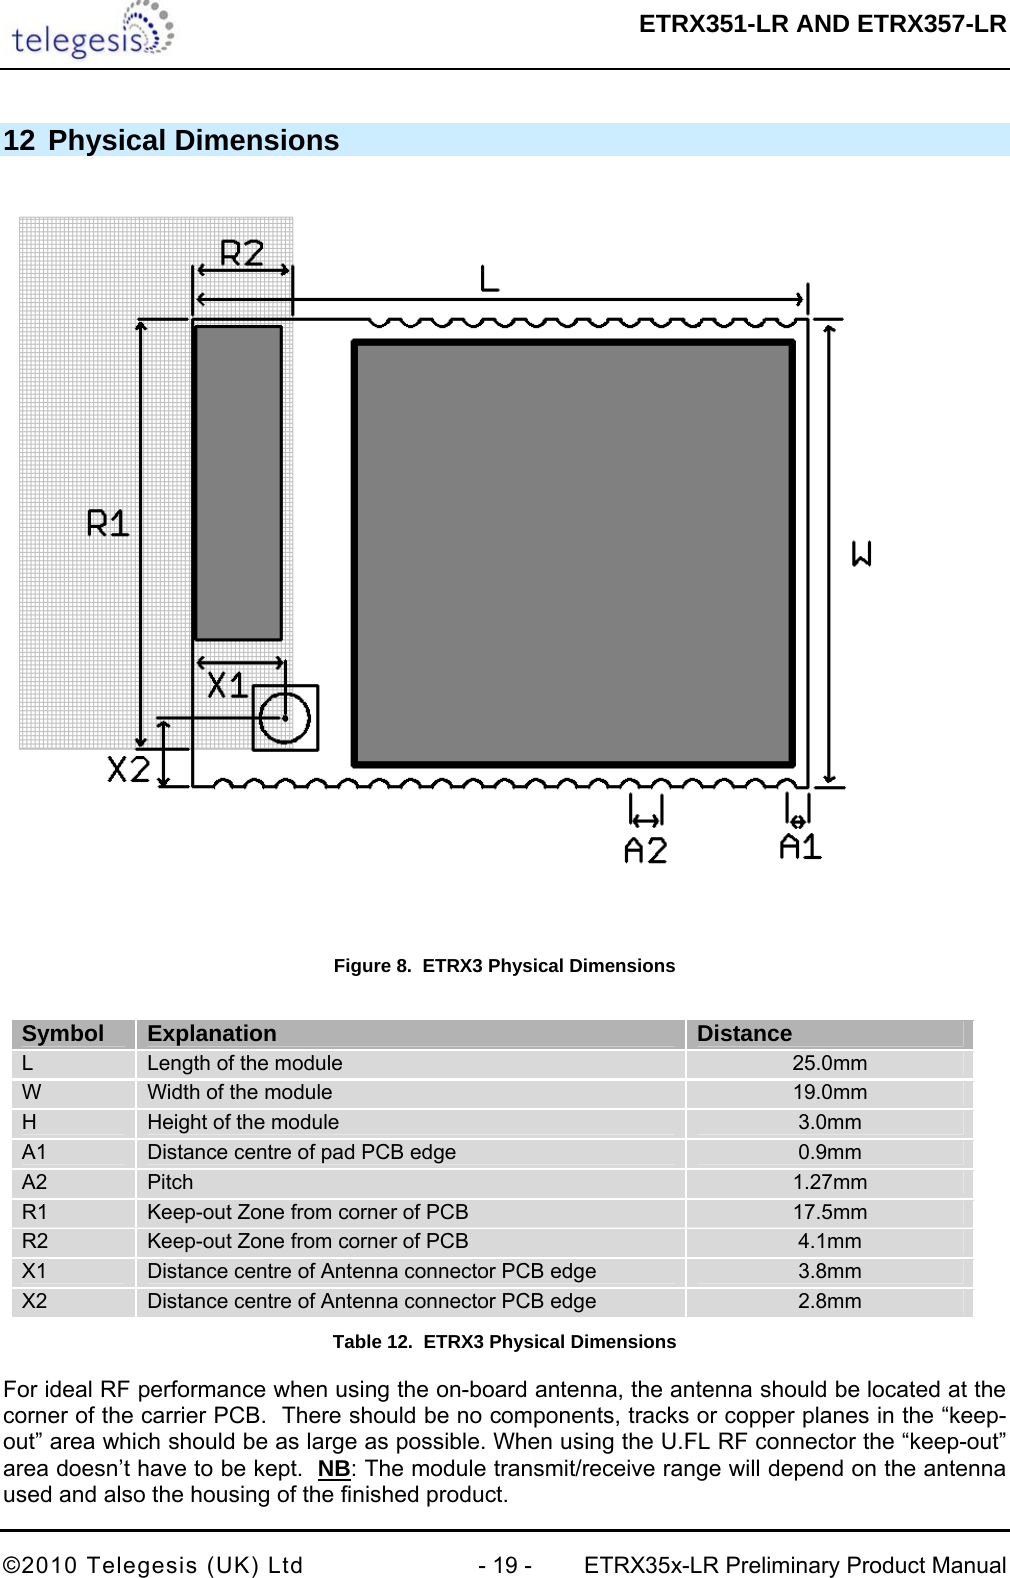  ETRX351-LR AND ETRX357-LR  ©2010 Telegesis (UK) Ltd  - 19 -  ETRX35x-LR Preliminary Product Manual 12 Physical Dimensions  Figure 8.  ETRX3 Physical Dimensions  Symbol   Explanation   Distance  L   Length of the module   25.0mm  W   Width of the module   19.0mm  H   Height of the module   3.0mm  A1   Distance centre of pad PCB edge  0.9mm  A2  Pitch   1.27mm  R1   Keep-out Zone from corner of PCB   17.5mm  R2   Keep-out Zone from corner of PCB   4.1mm  X1   Distance centre of Antenna connector PCB edge   3.8mm  X2   Distance centre of Antenna connector PCB edge   2.8mm  Table 12.  ETRX3 Physical Dimensions For ideal RF performance when using the on-board antenna, the antenna should be located at the corner of the carrier PCB.  There should be no components, tracks or copper planes in the “keep-out” area which should be as large as possible. When using the U.FL RF connector the “keep-out” area doesn’t have to be kept.  NB: The module transmit/receive range will depend on the antenna used and also the housing of the finished product. 